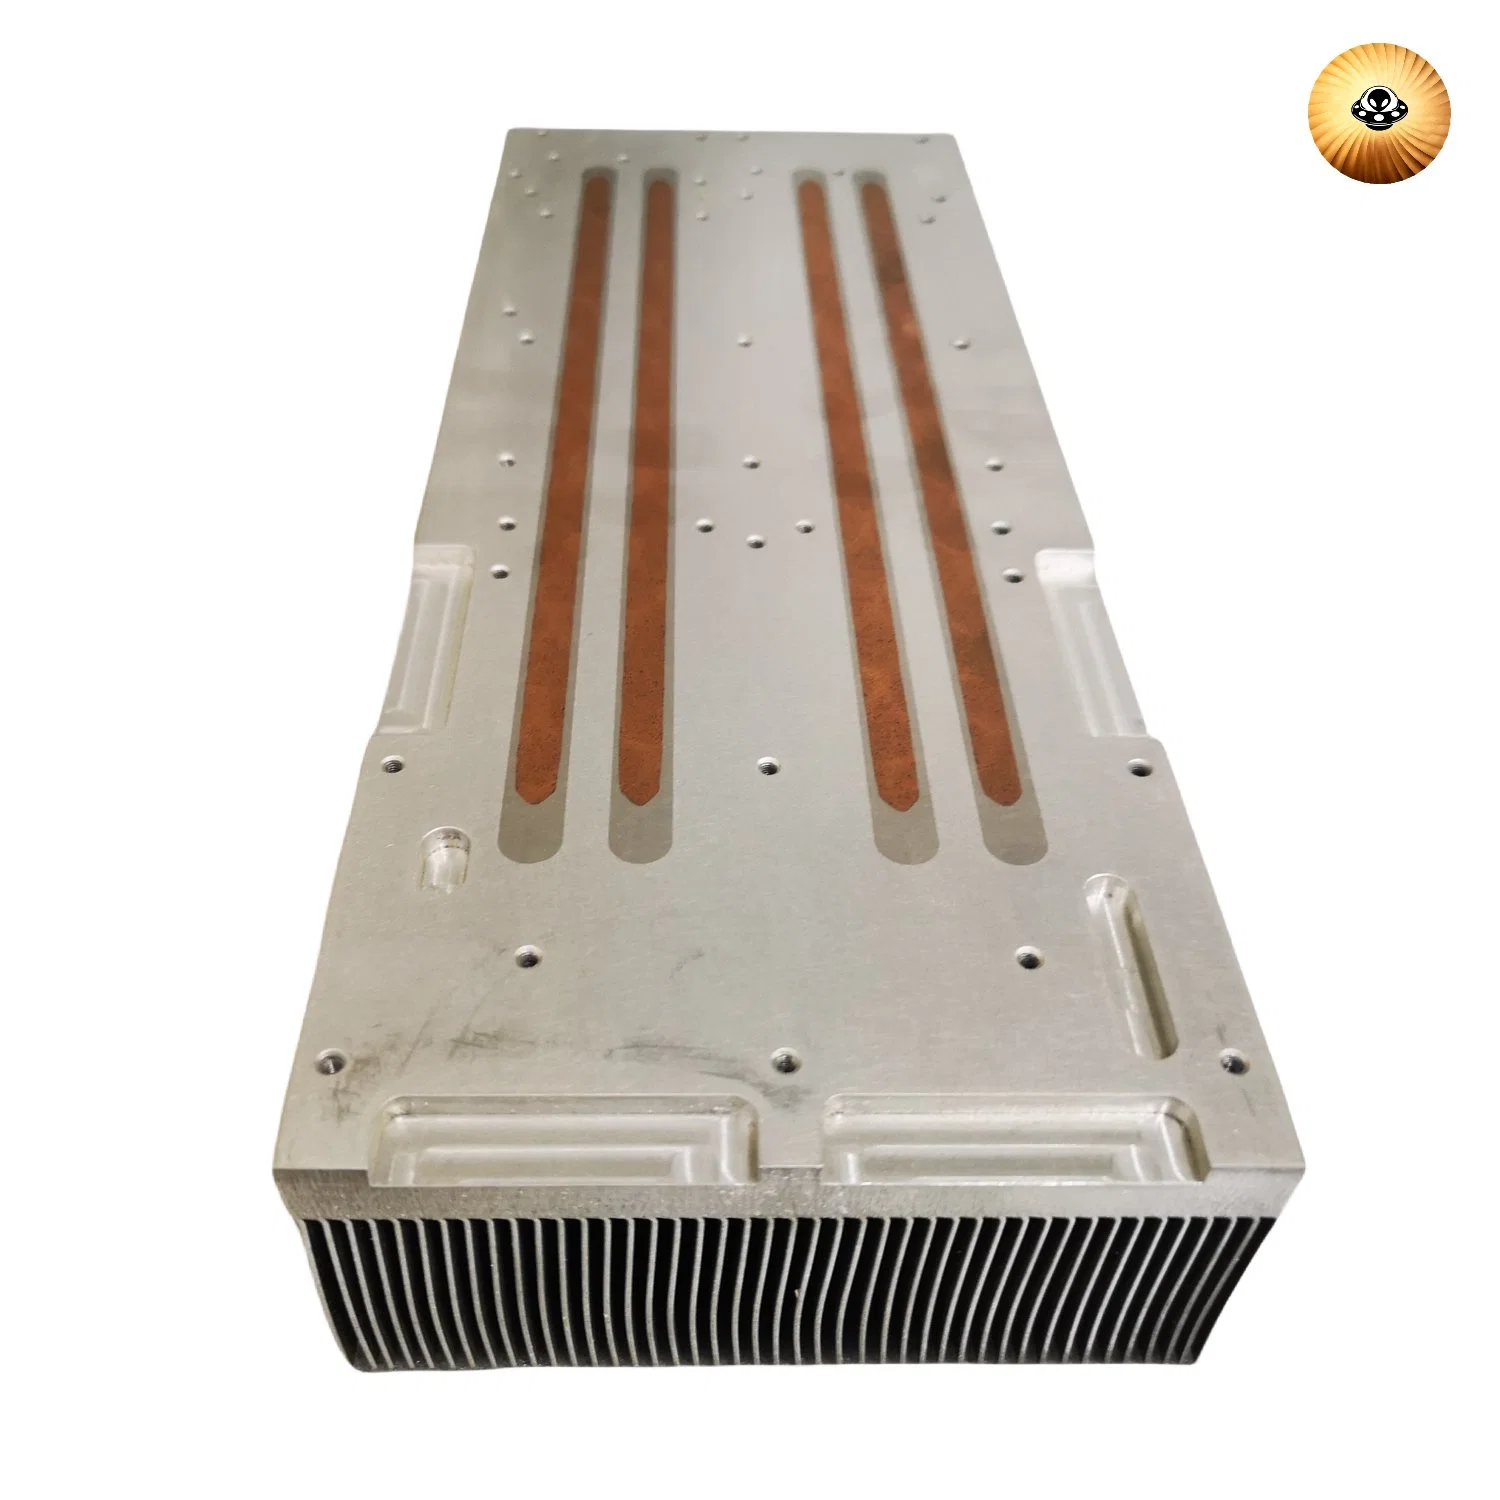 Aluminum Alloy Liquid Cold Plate Copper Tube Cooling Plate Heat Sink Product